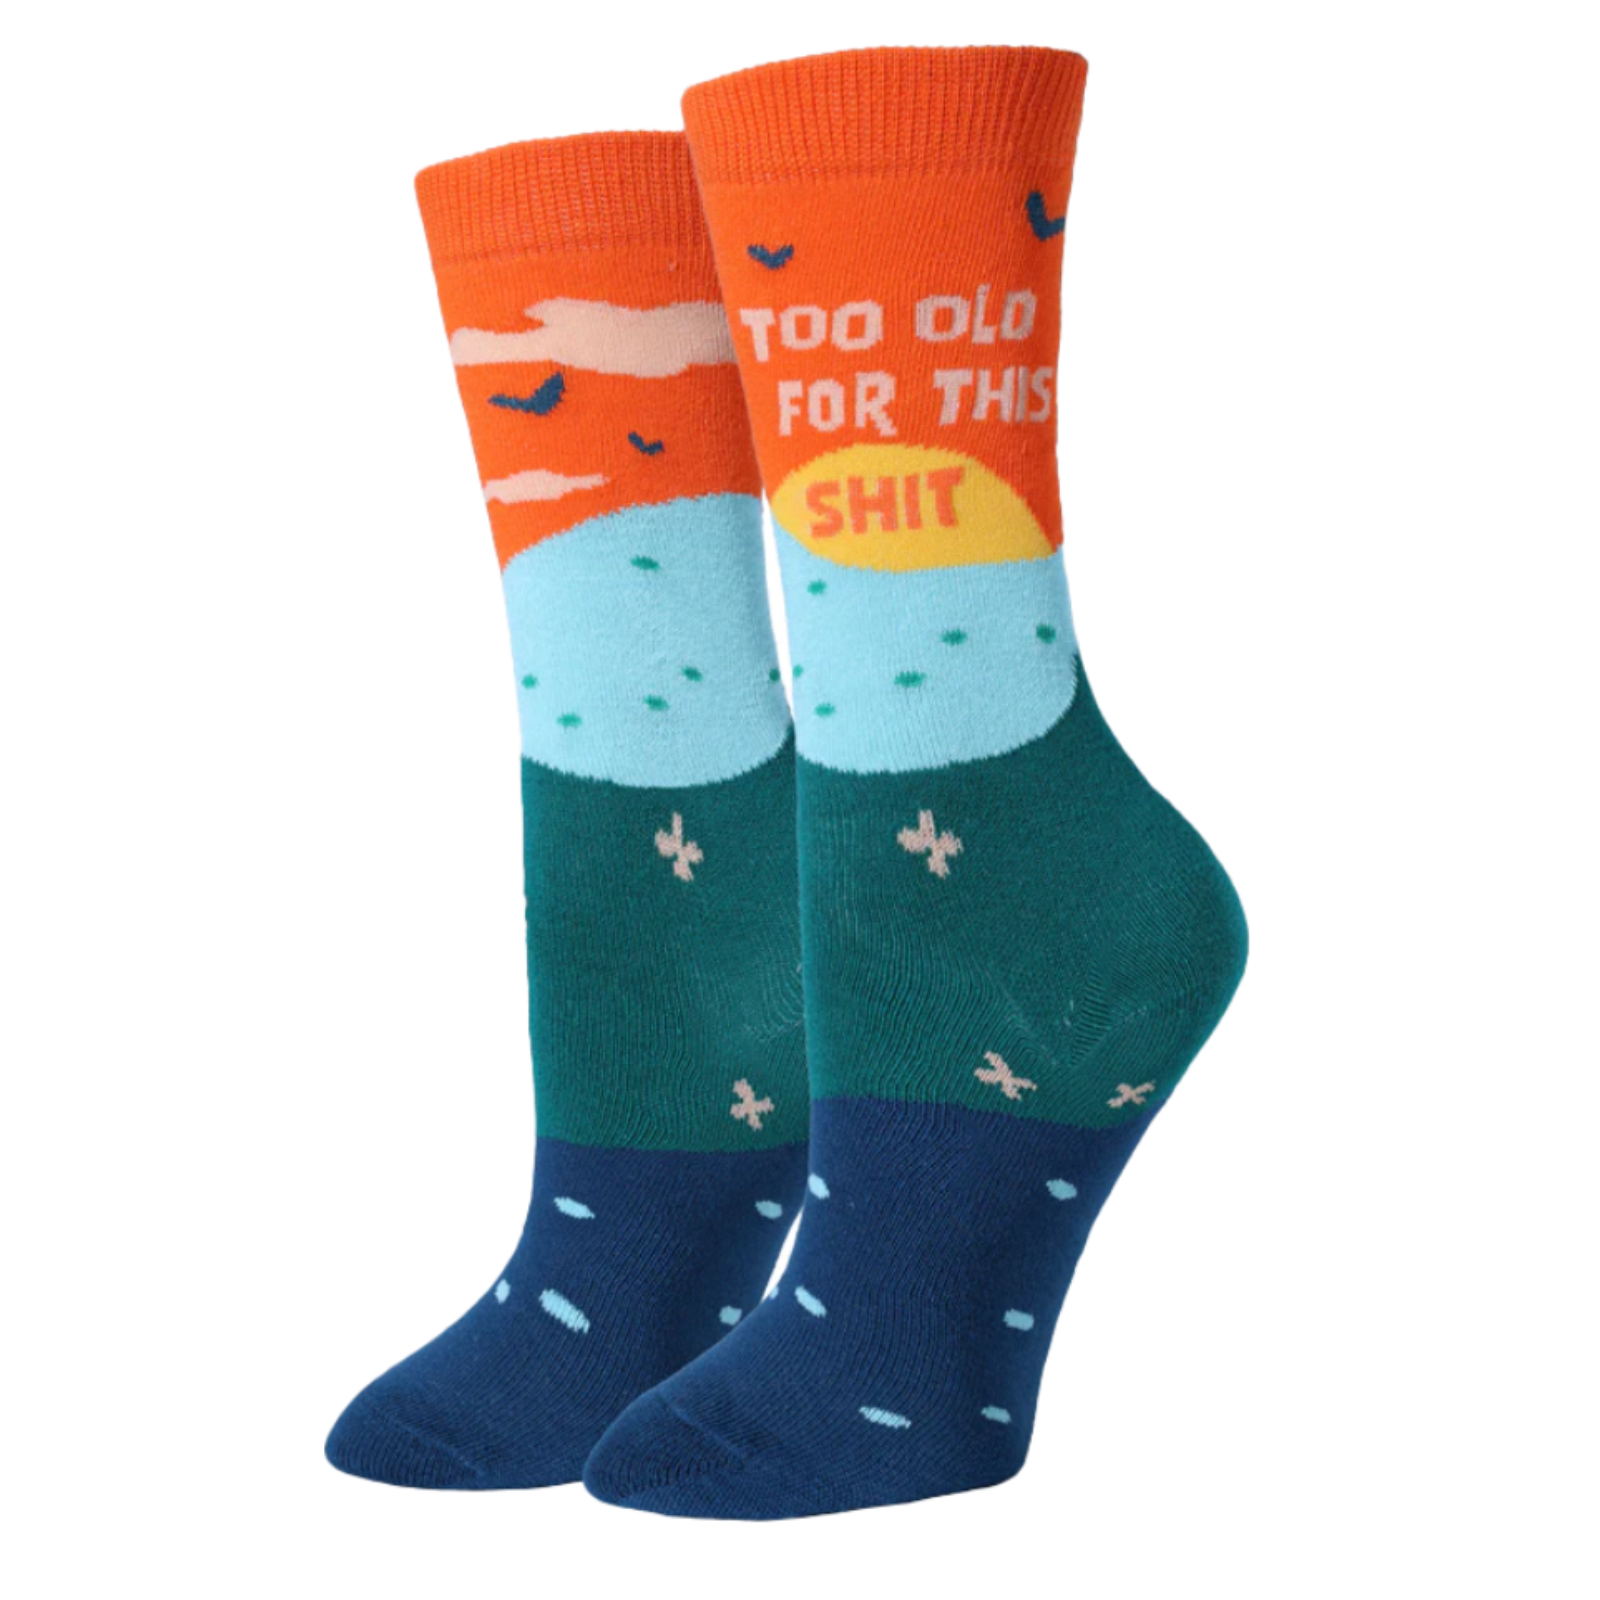 Sock Harbor Too Old For This Shit women's crew sock featuring orange, blue, and teal sock that says "Too Old For This Shit". Socks shown on display feet. 